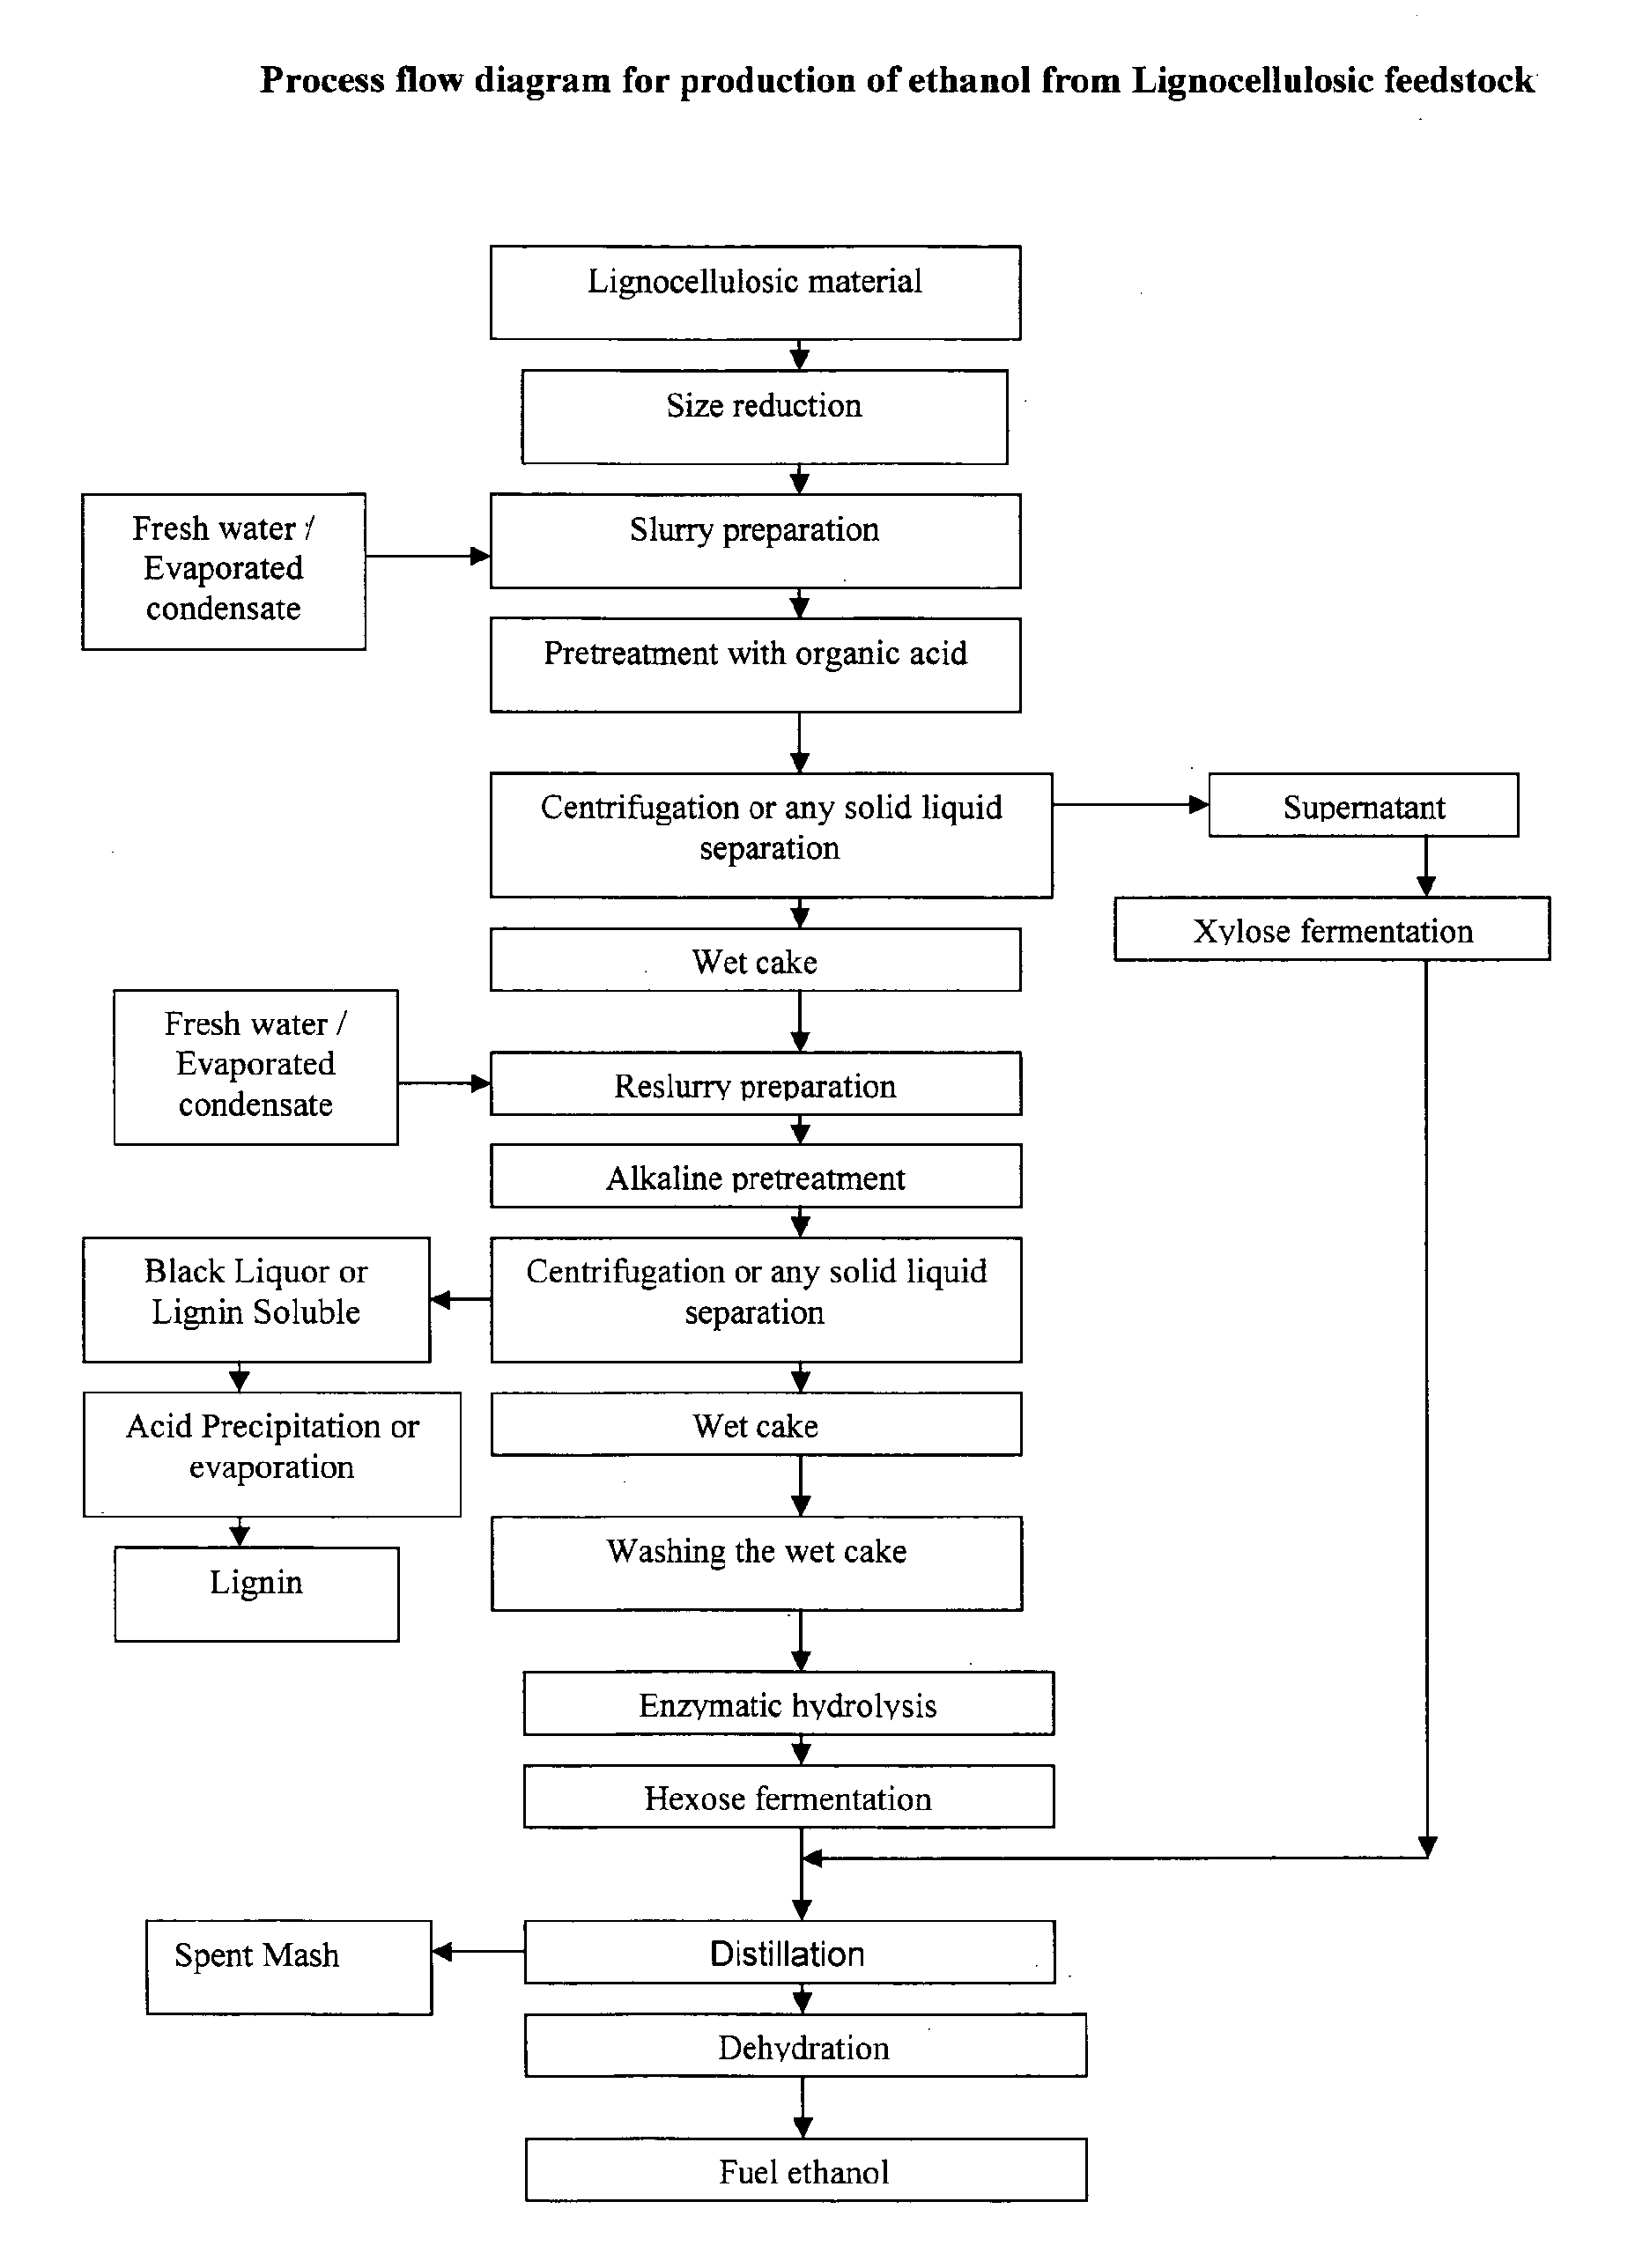 Process for Production of Ethanol from Lignocellulosic Material